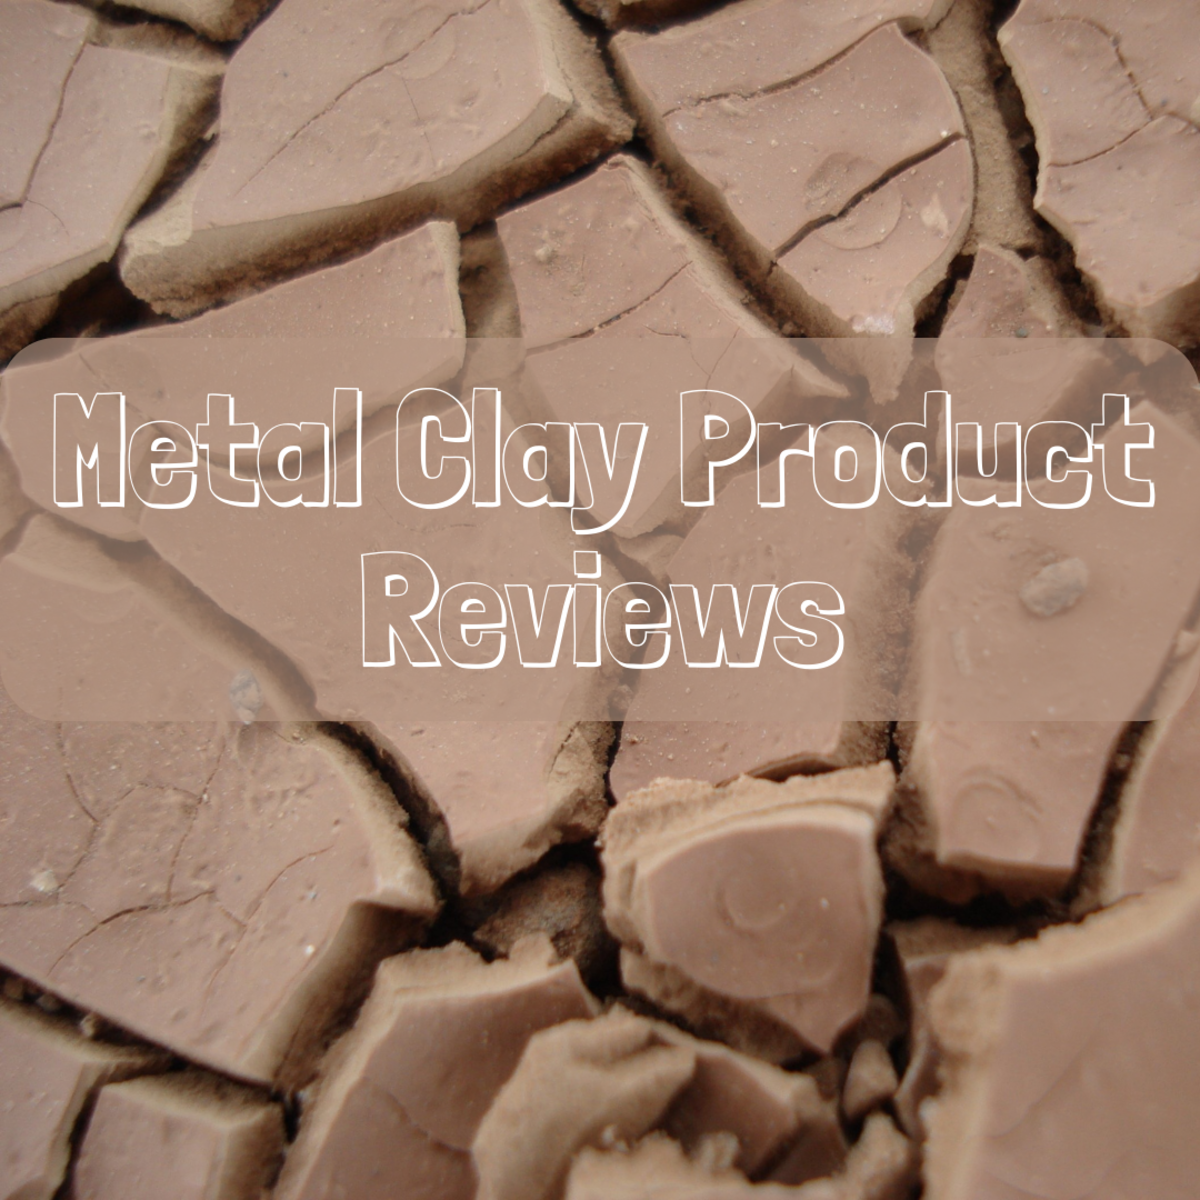 Metal Clay Product Reviews